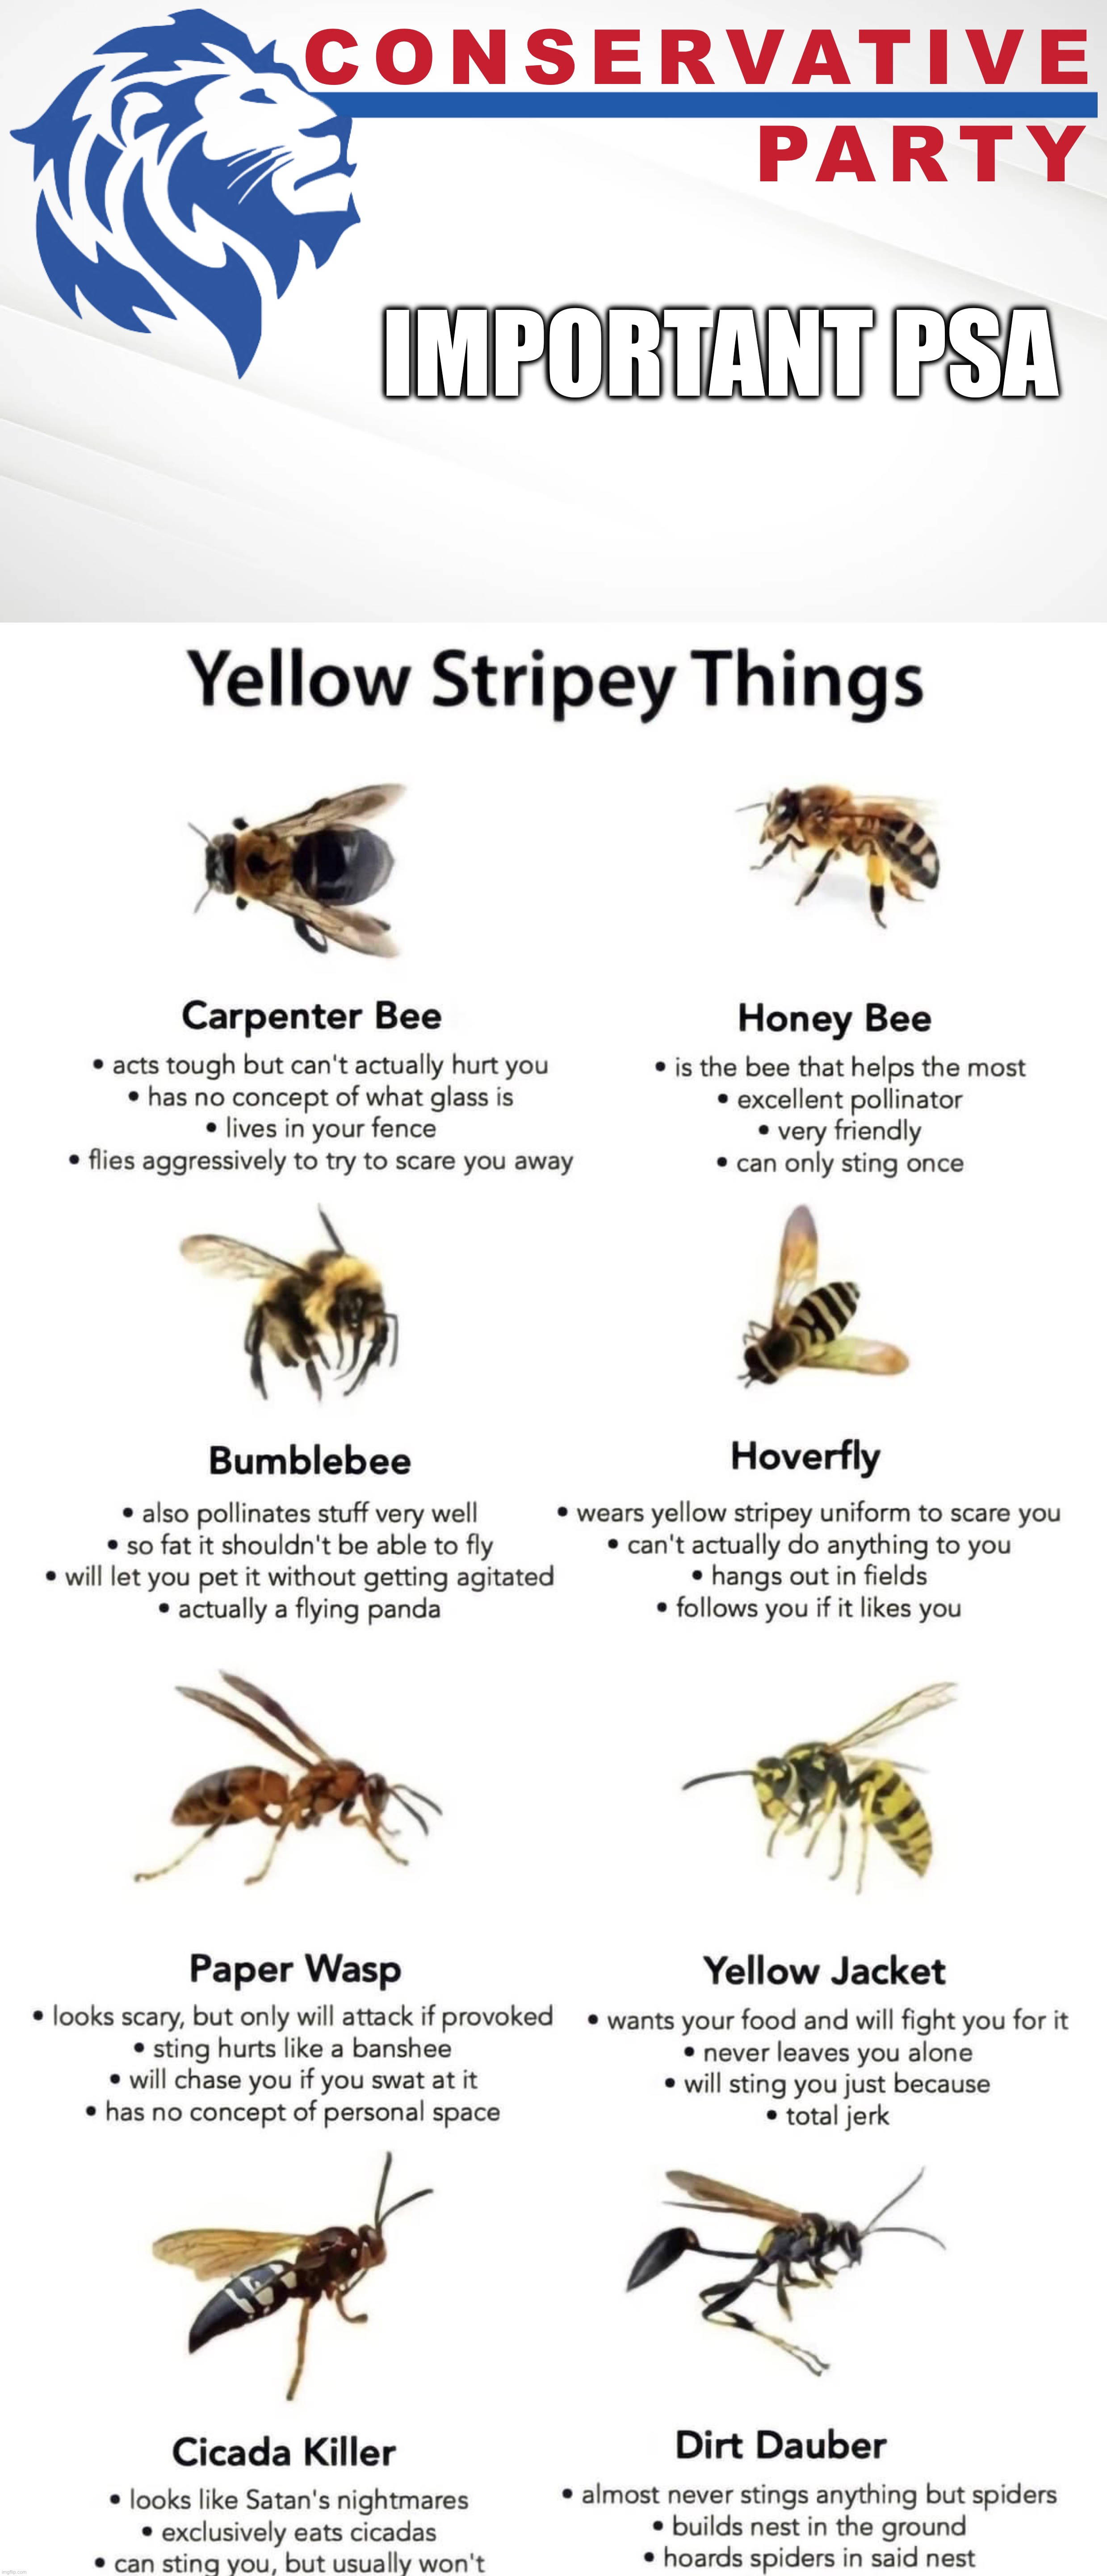 Know your yellow stripey flying things! | IMPORTANT PSA | image tagged in conservative party of imgflip,yellow stripey things,yellow,stripey,flying,things | made w/ Imgflip meme maker